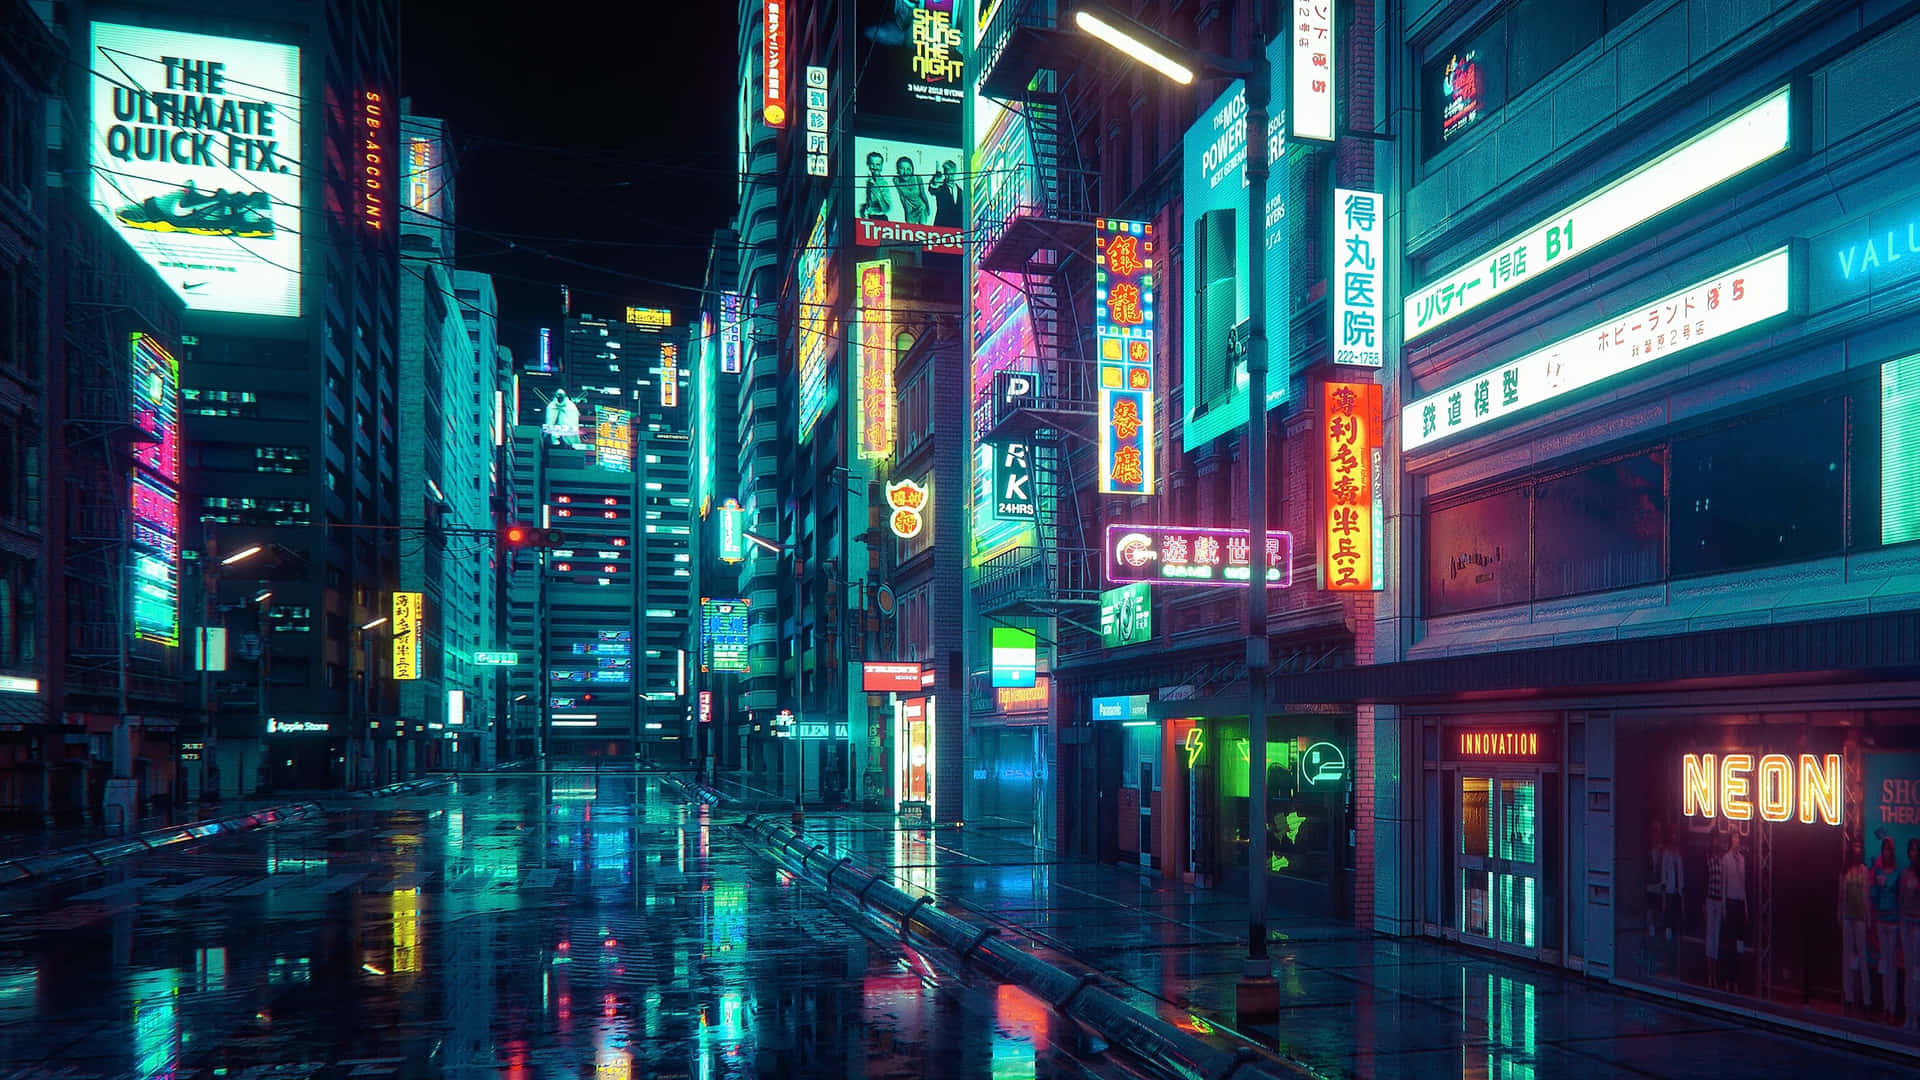 A City Street With Neon Signs And Lights